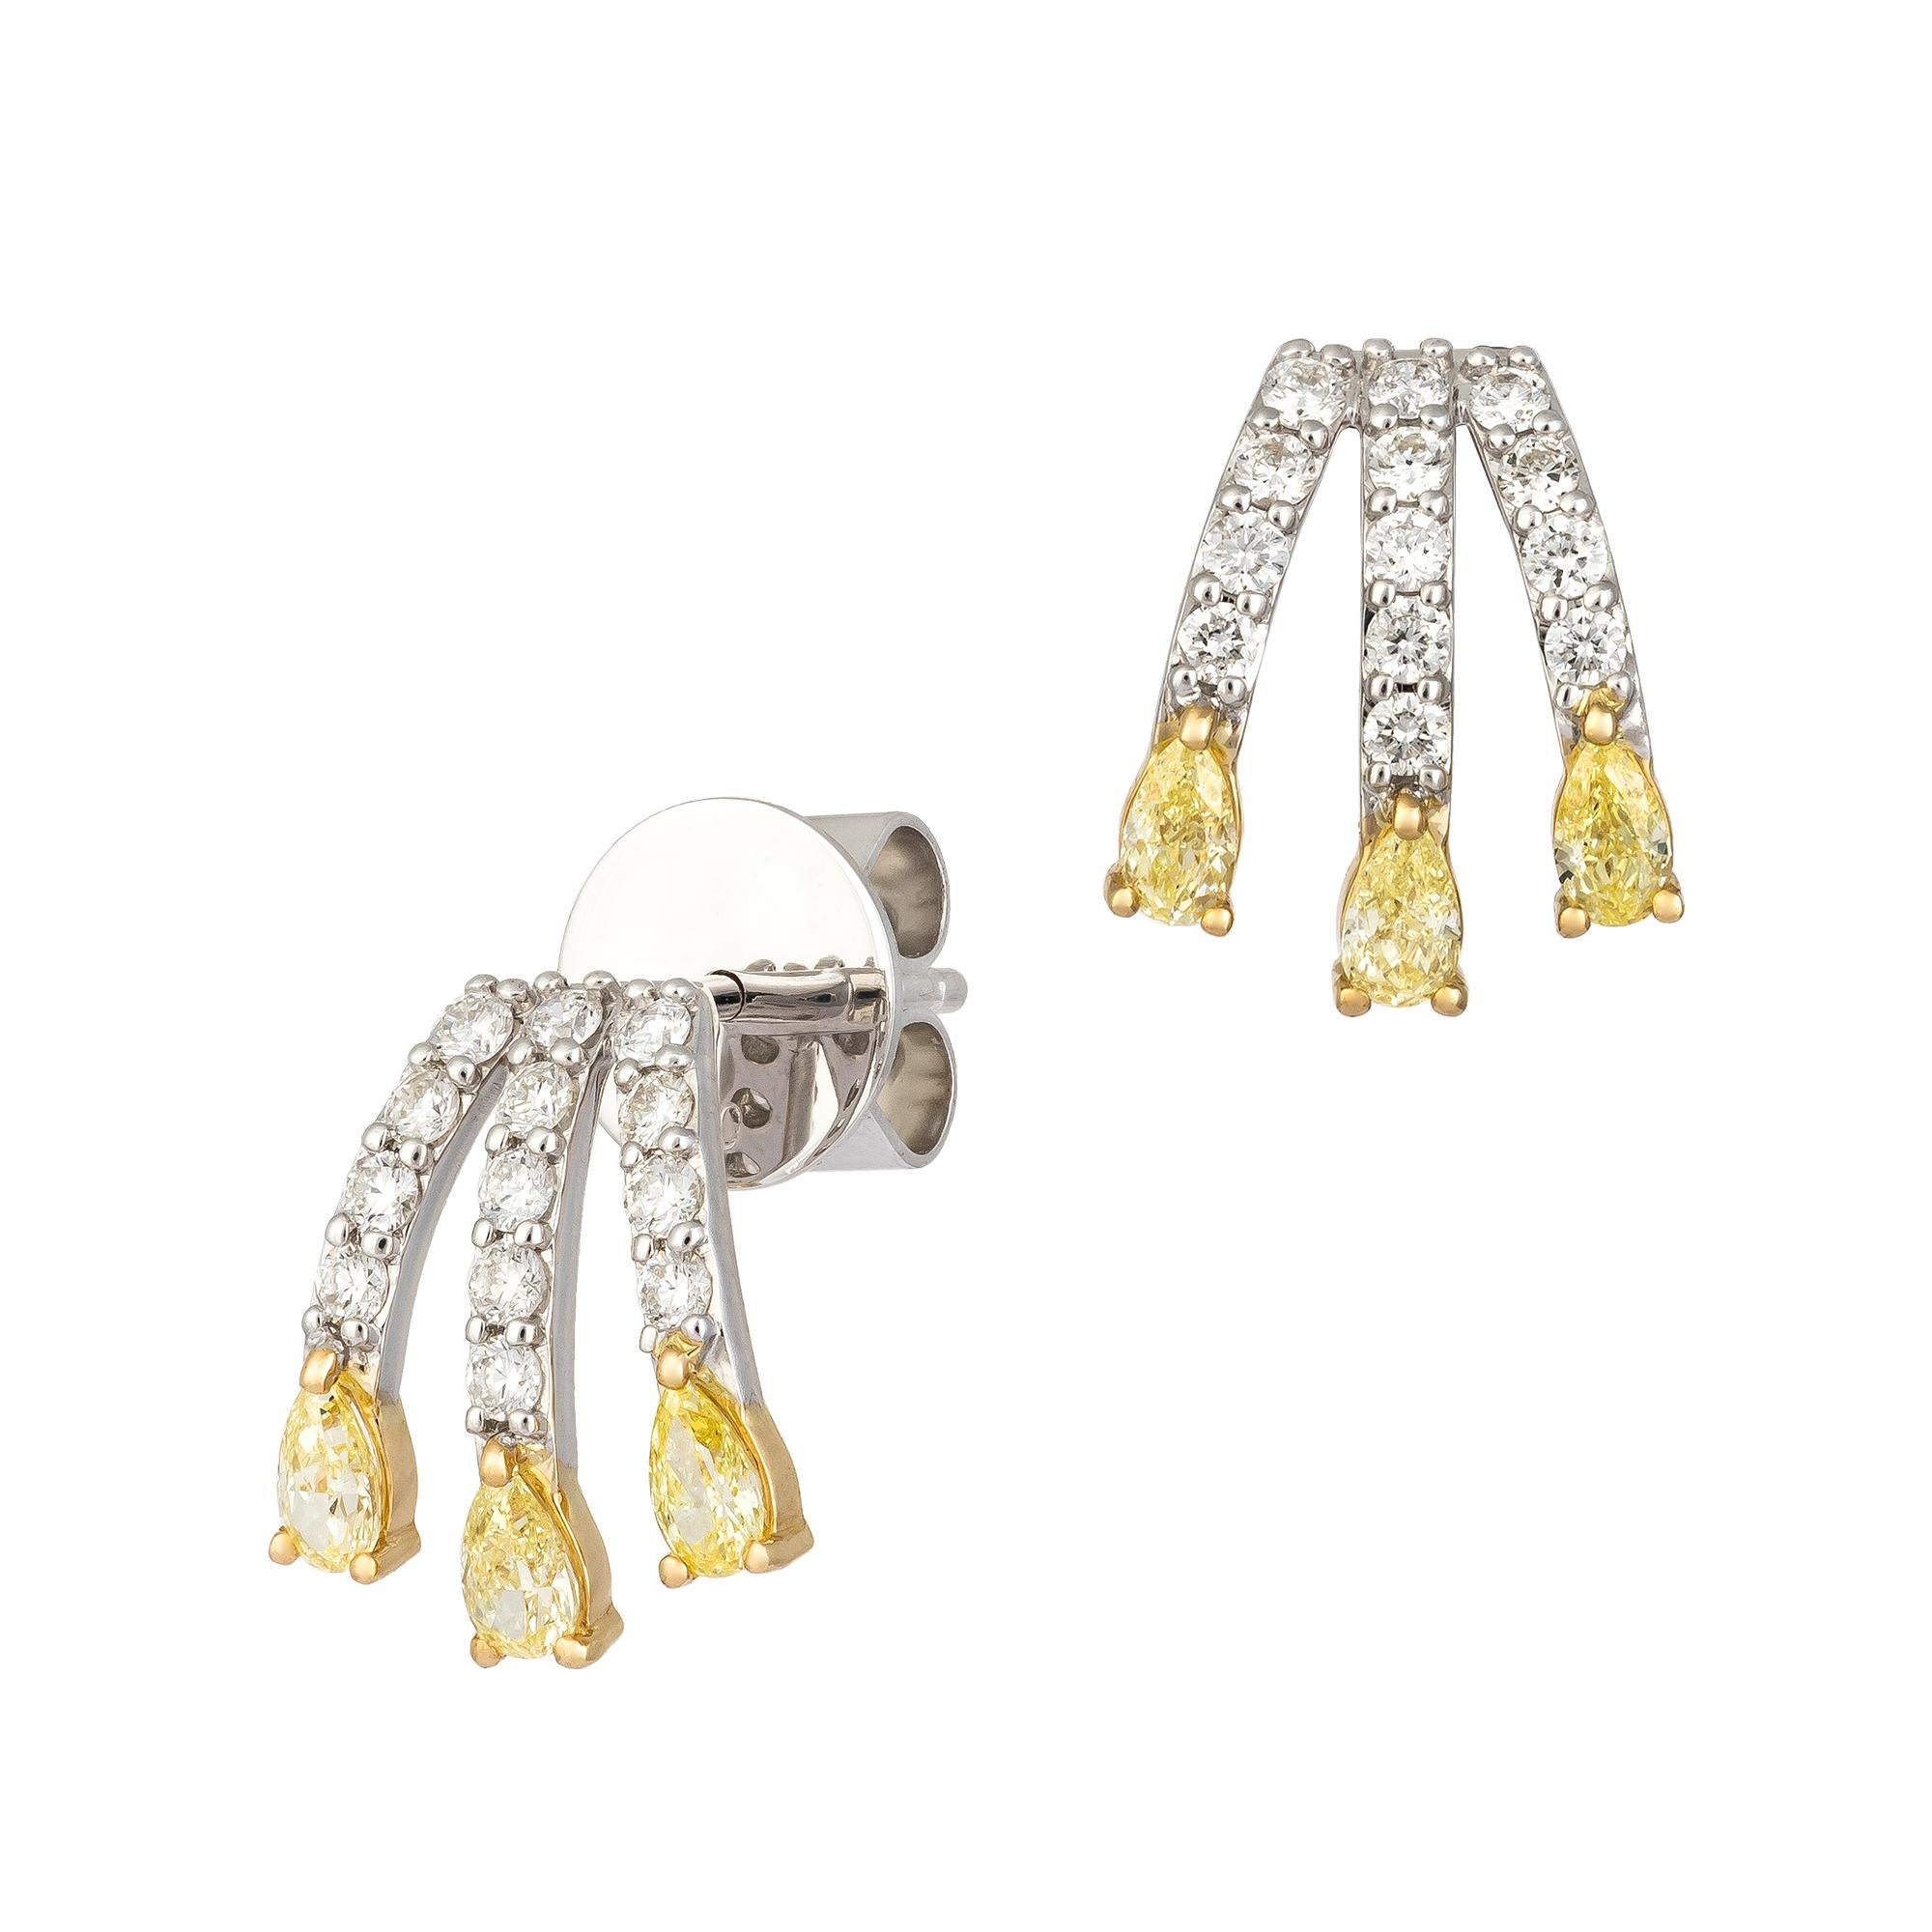 EARRING 18K White Yellow Gold Diamond 0.35 Cts/26 Pieces, Yellow Diamond 0.49 Cts/6 Pieces
